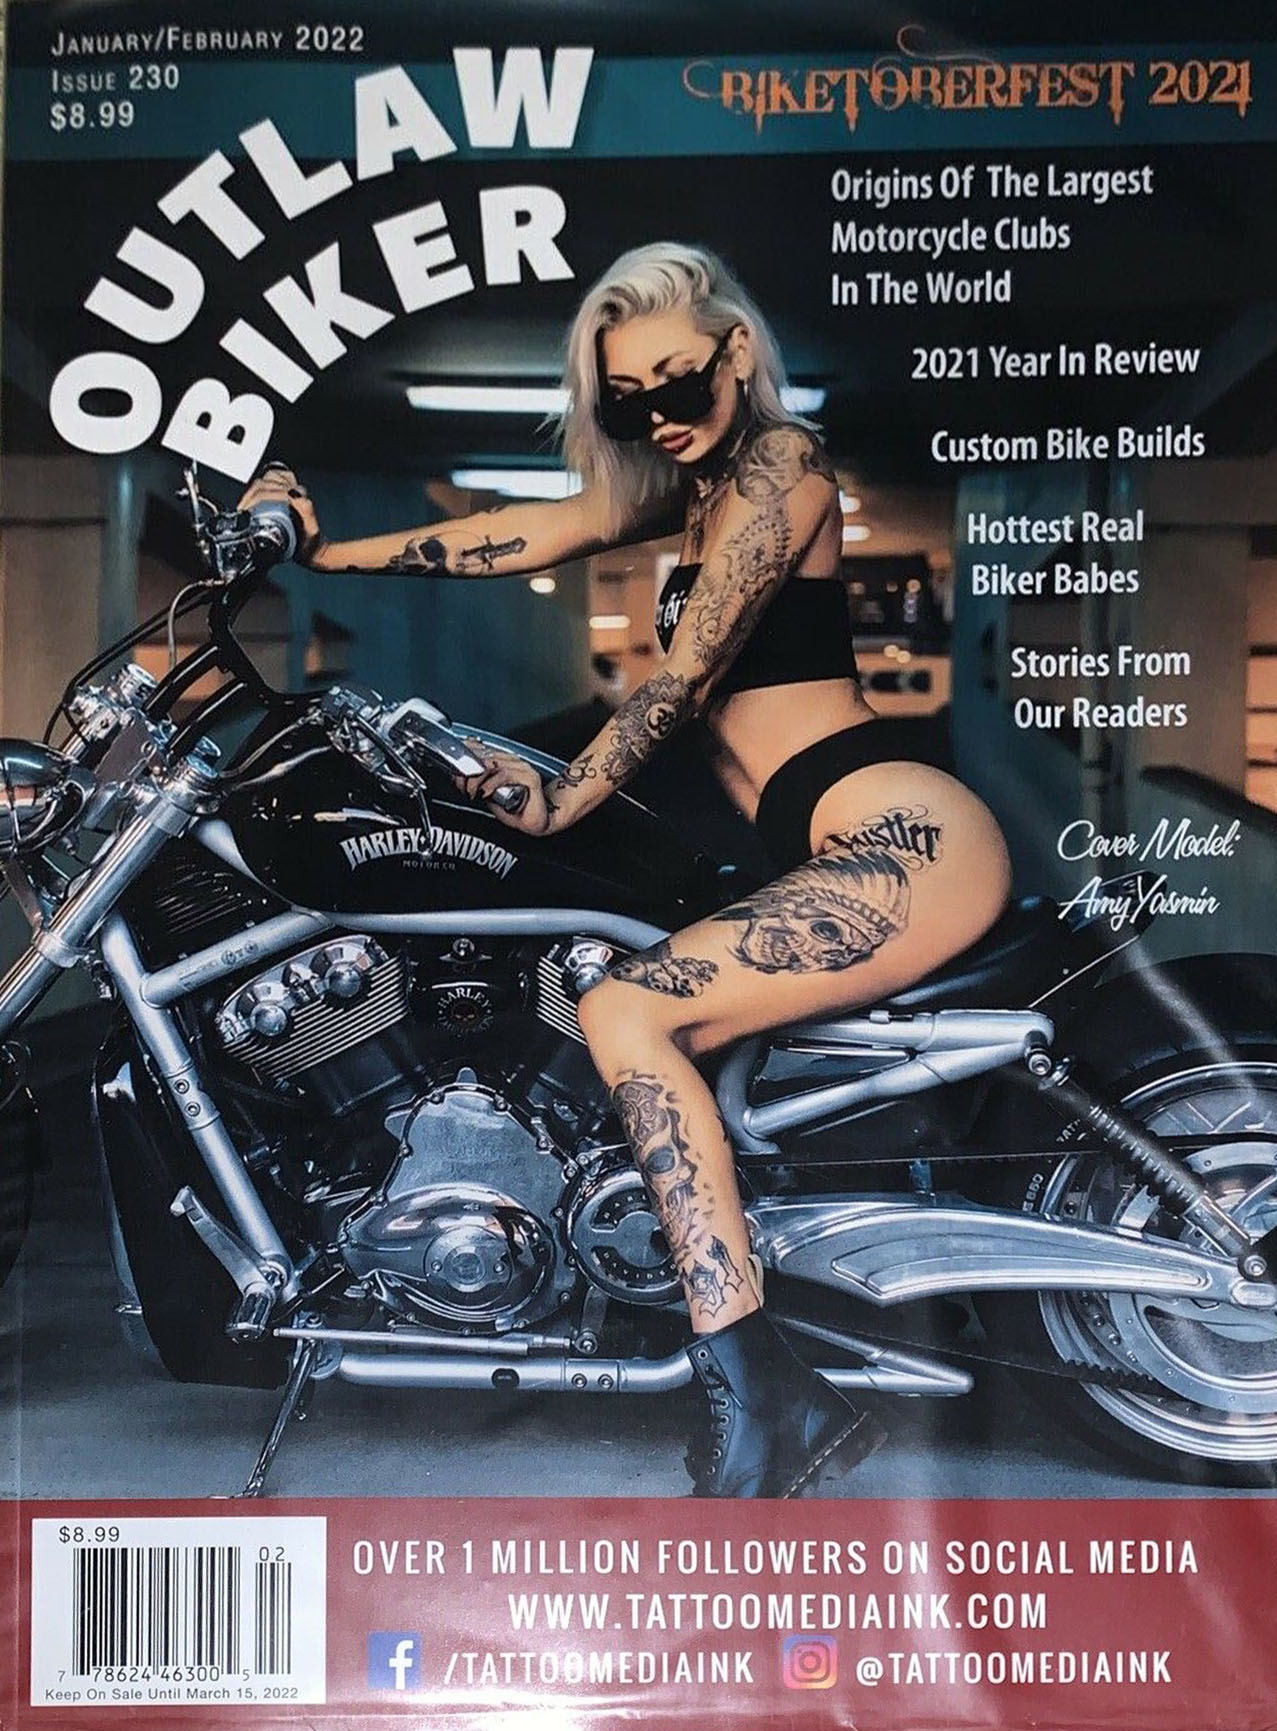 Outlaw Biker January/February 2022 magazine back issue Outlaw Biker magizine back copy Outlaw Biker January/February 2022 Magazine Back Issue for Bike Riding Rebels and Members of Outlaw Motorcycle Clubs. Origins Of The Largest Motorcycle Clubs In The World.